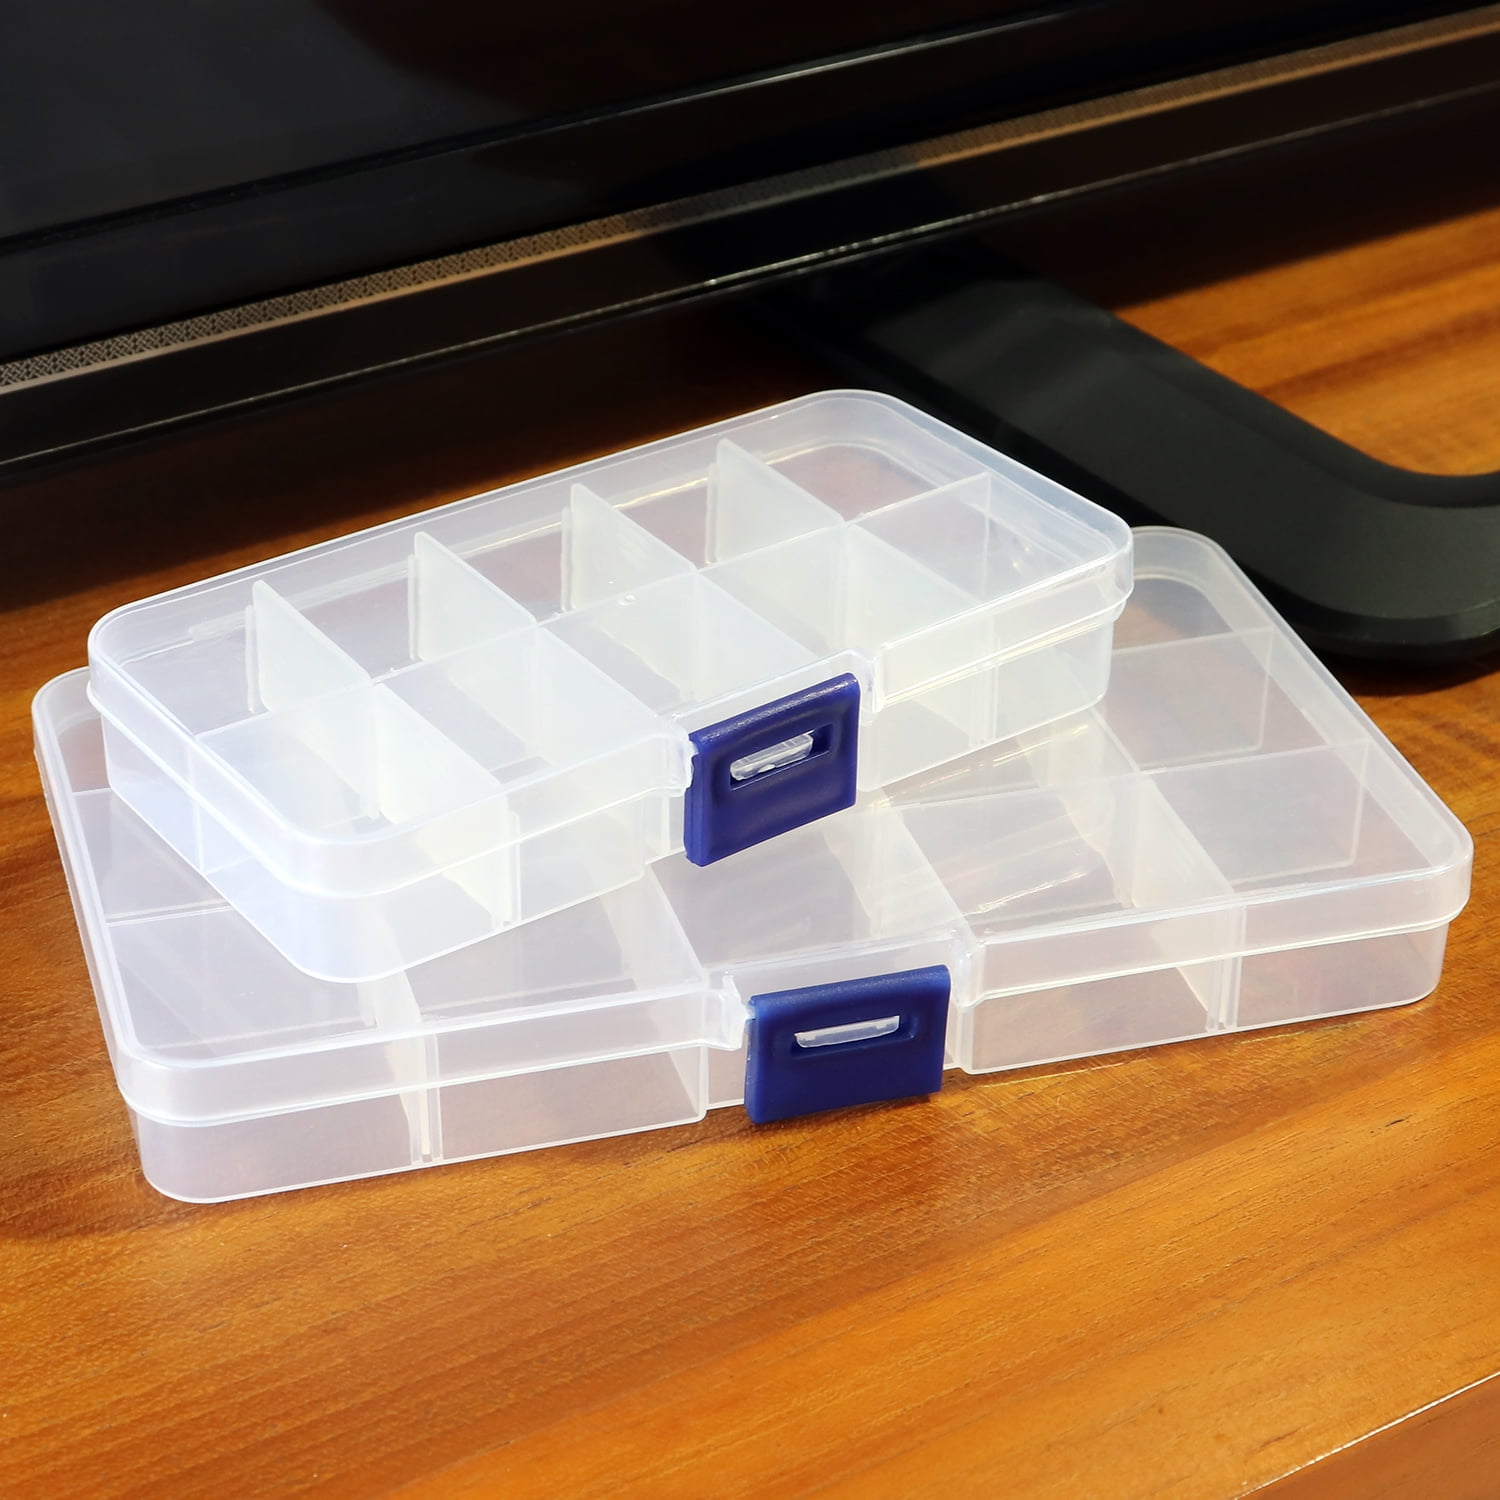 12 Pack Small Plastic Storage Box with Lid, 5.3x3x2 Stackable Clear  Latch Storage Case Bins Organizer Container for Craft Items, Jewelry Beads,  6